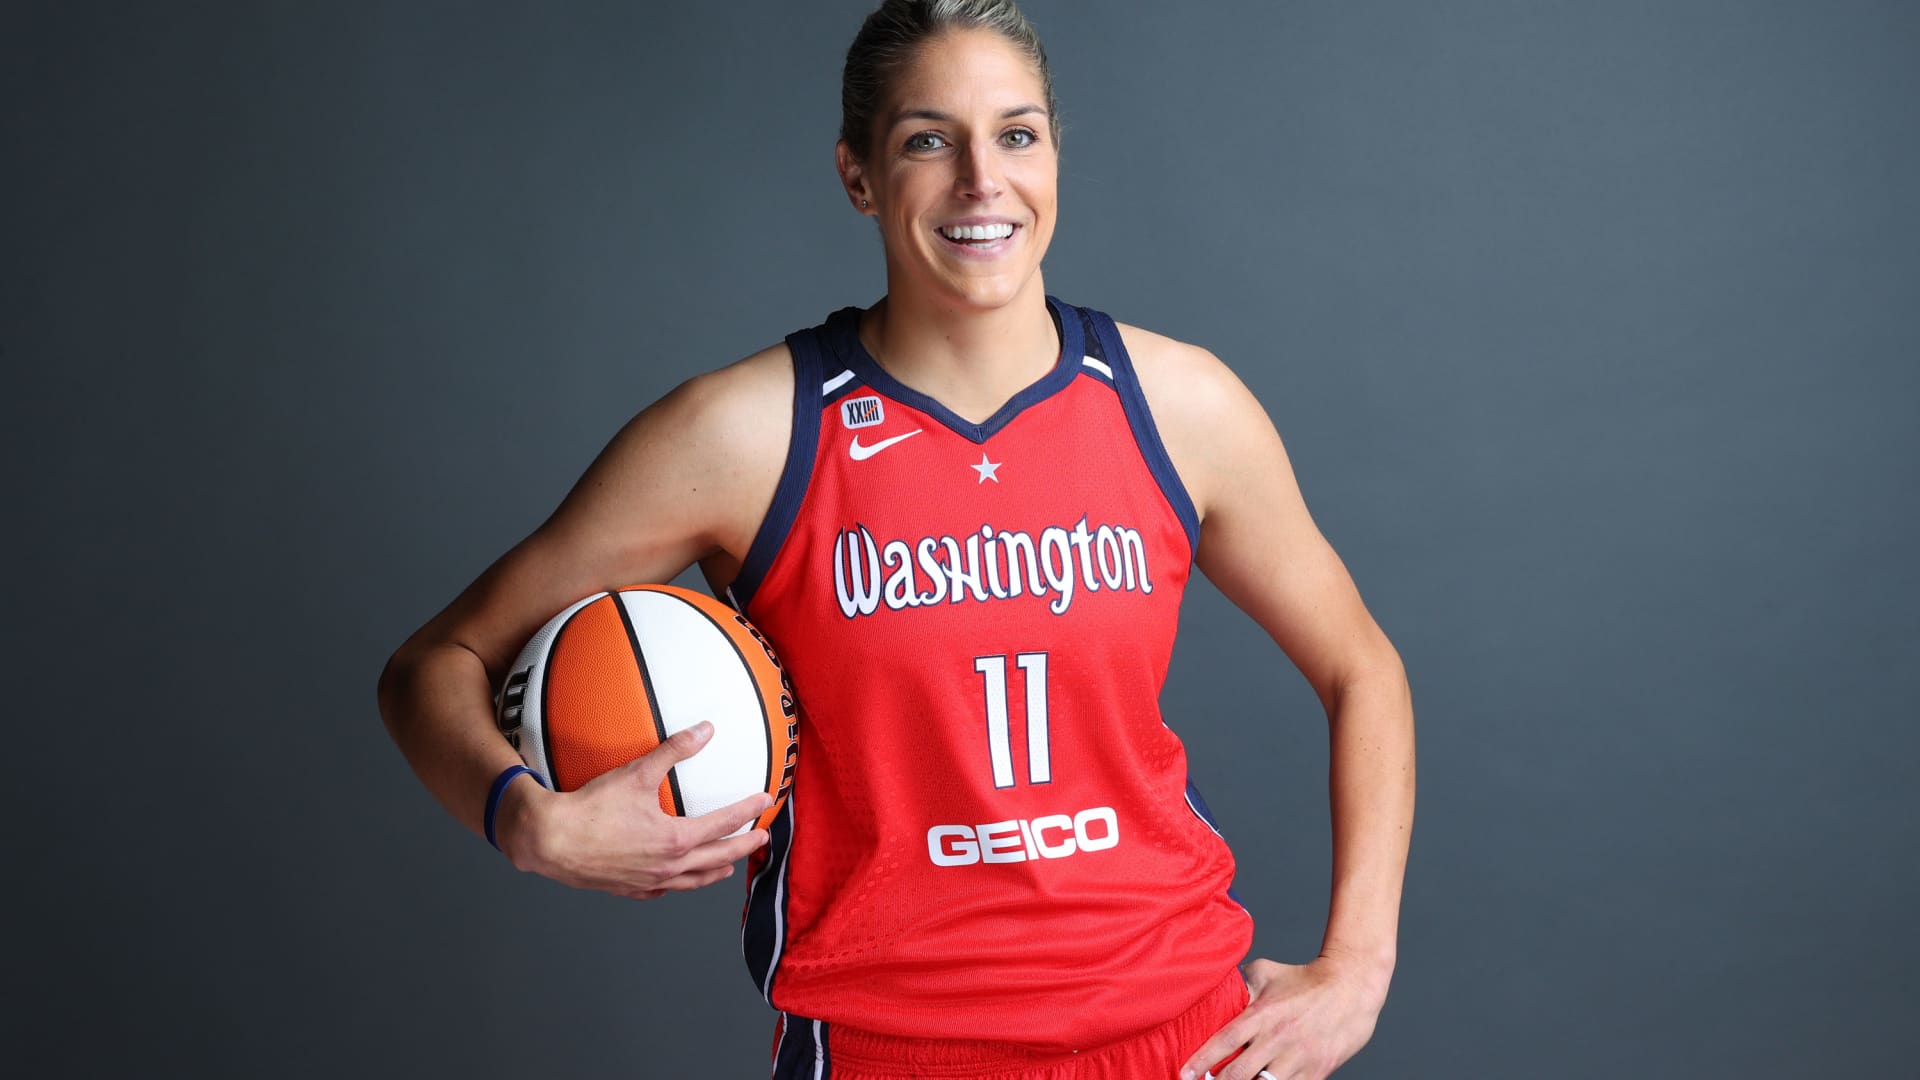 Elena Delle Donne #11 of the Washington Mystics poses for a portrait during 2021 WNBA Media Day at the Entertainment and Sports Arena in St. Elizabeth's on April 26, 2021 in Washington, DC.